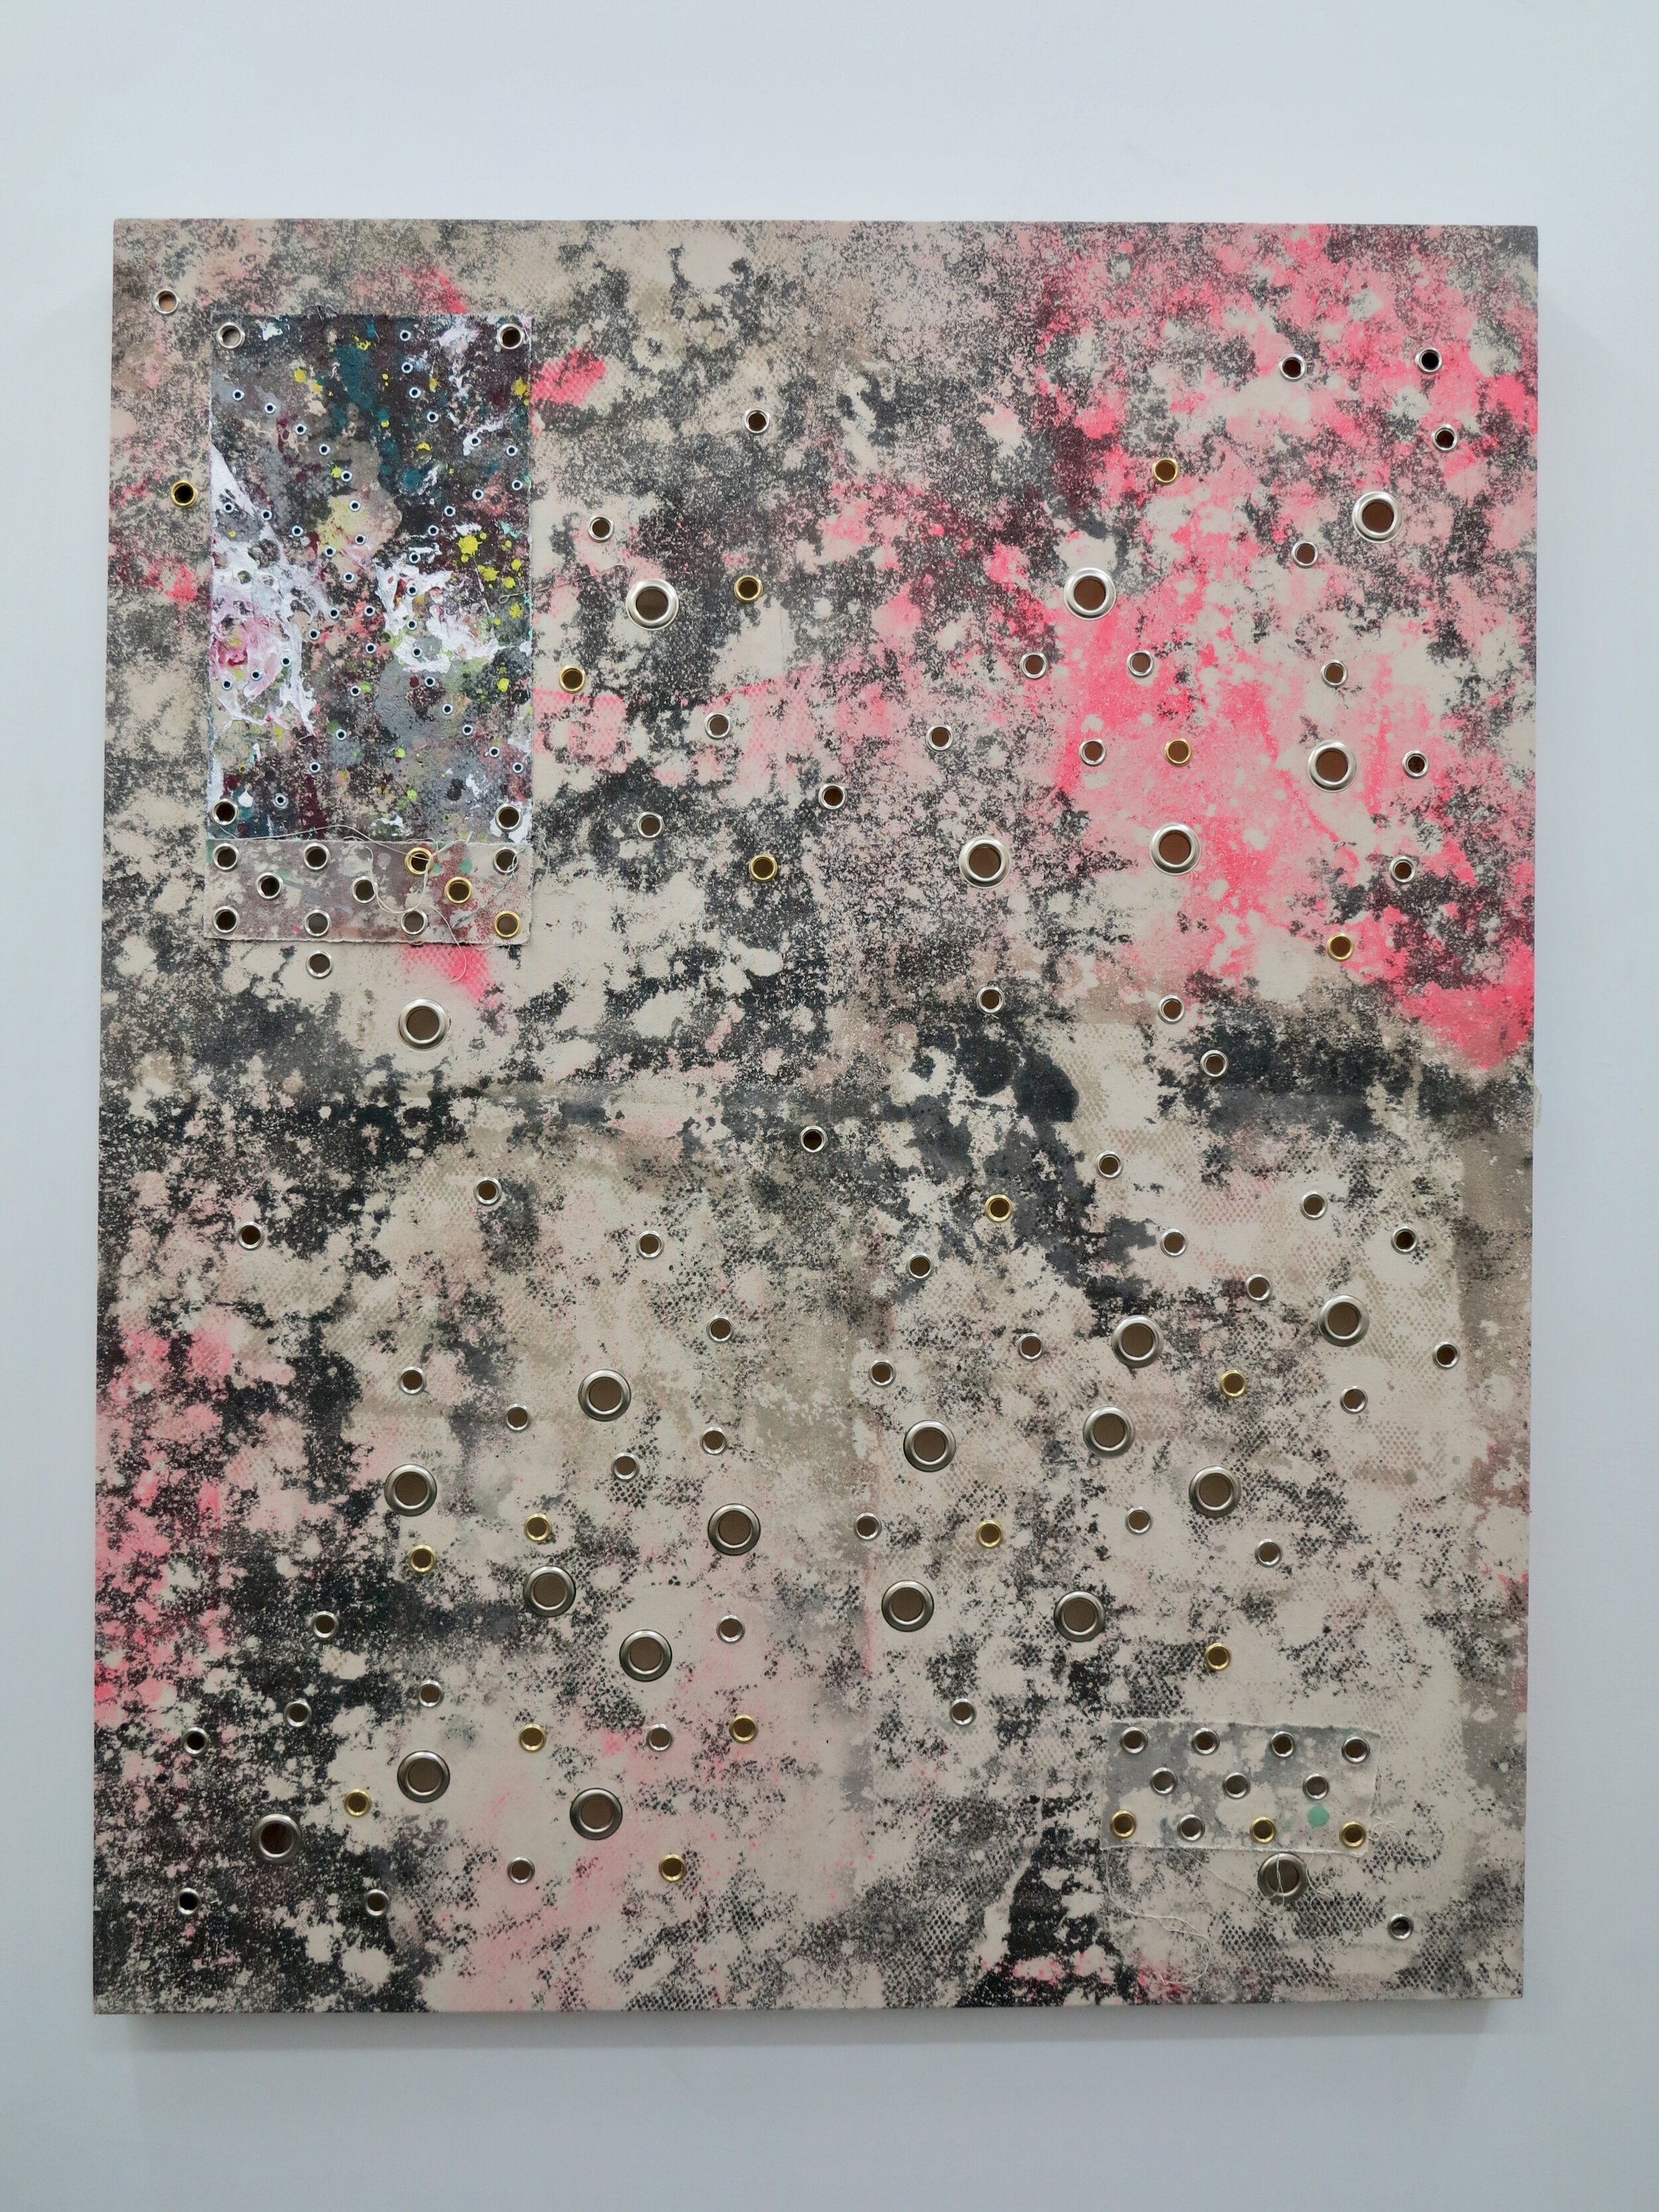   Pink Mist.   150 X 120 cm.  Resin and sand painting on canvas with brass eyelets.  London 2021. 